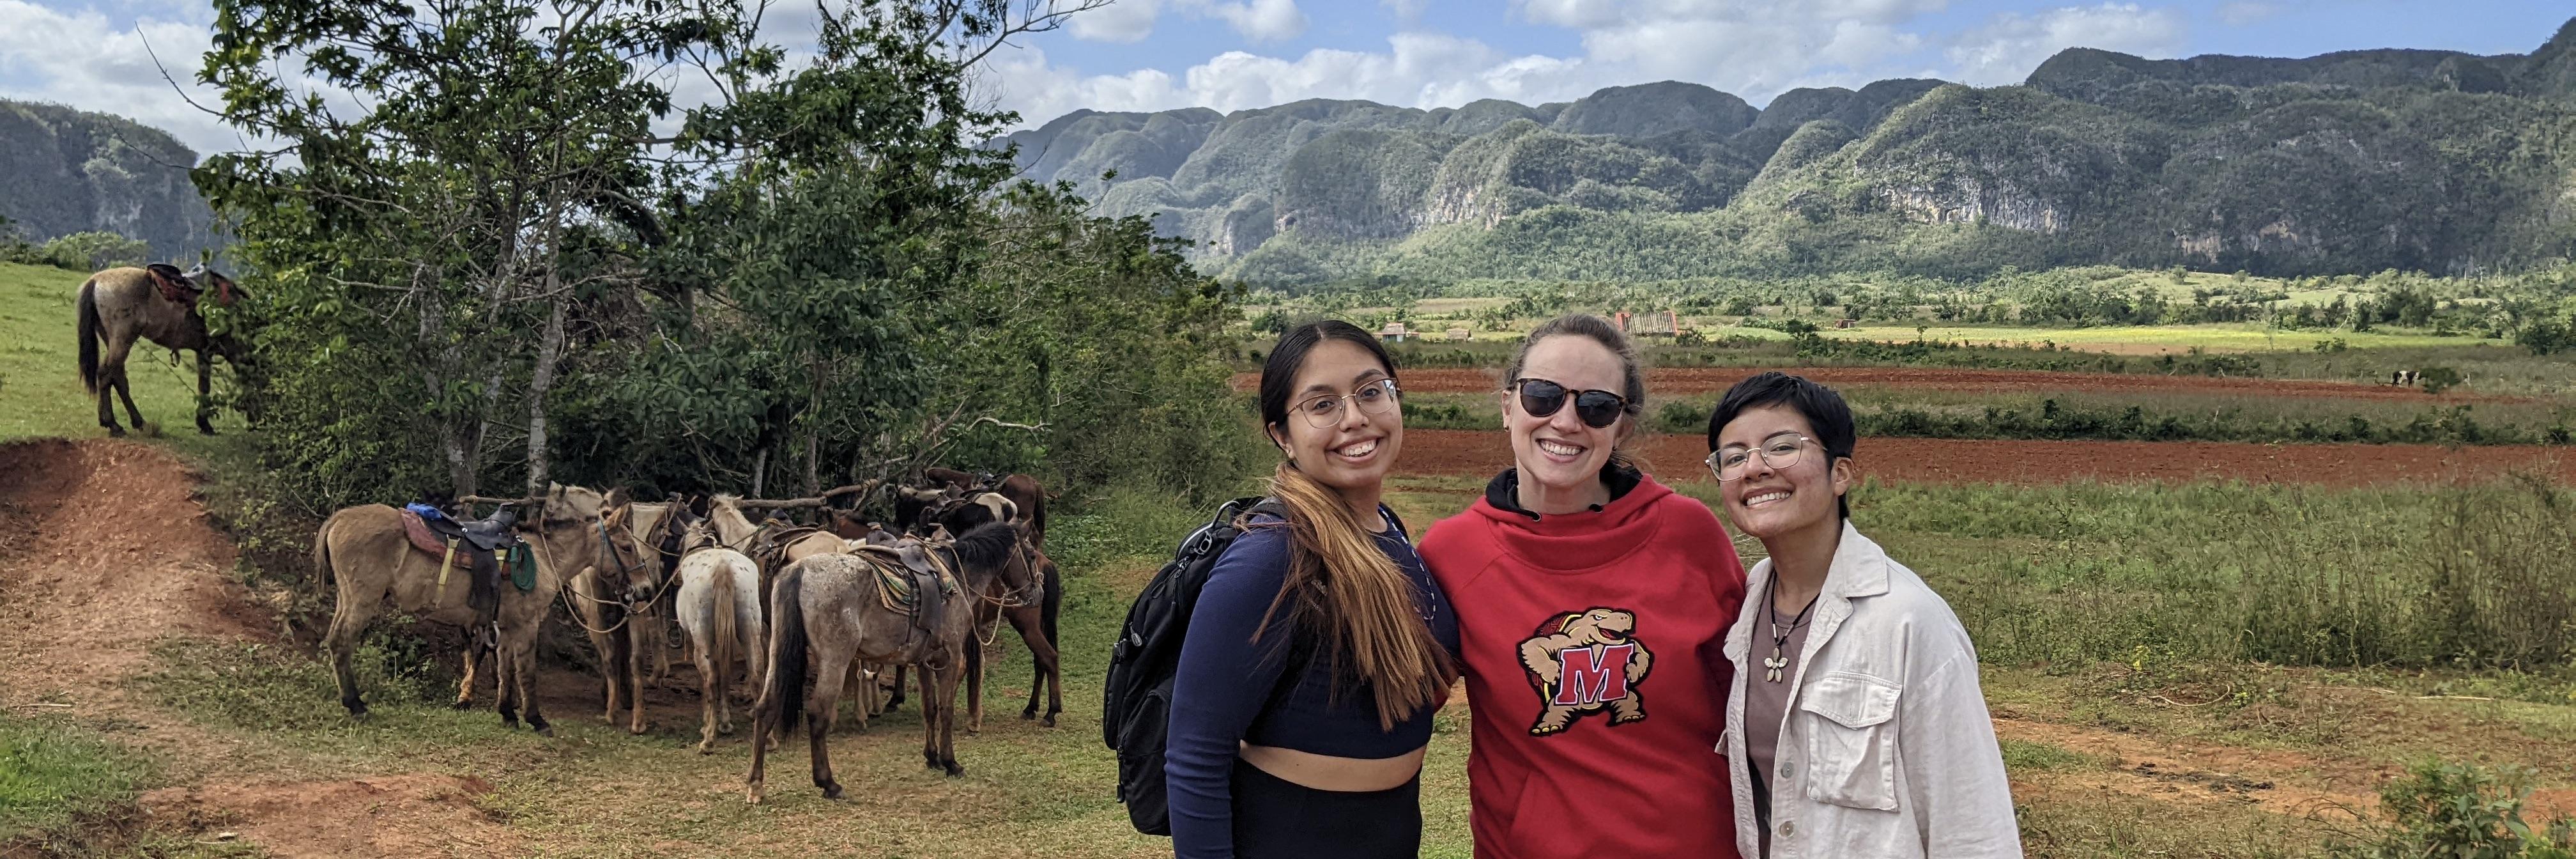 Three students stand in front of a group of horses. Green rolling hills are seen in the background and the student in the center wears a red Maryland sweatshirt with Testudo on the chest.